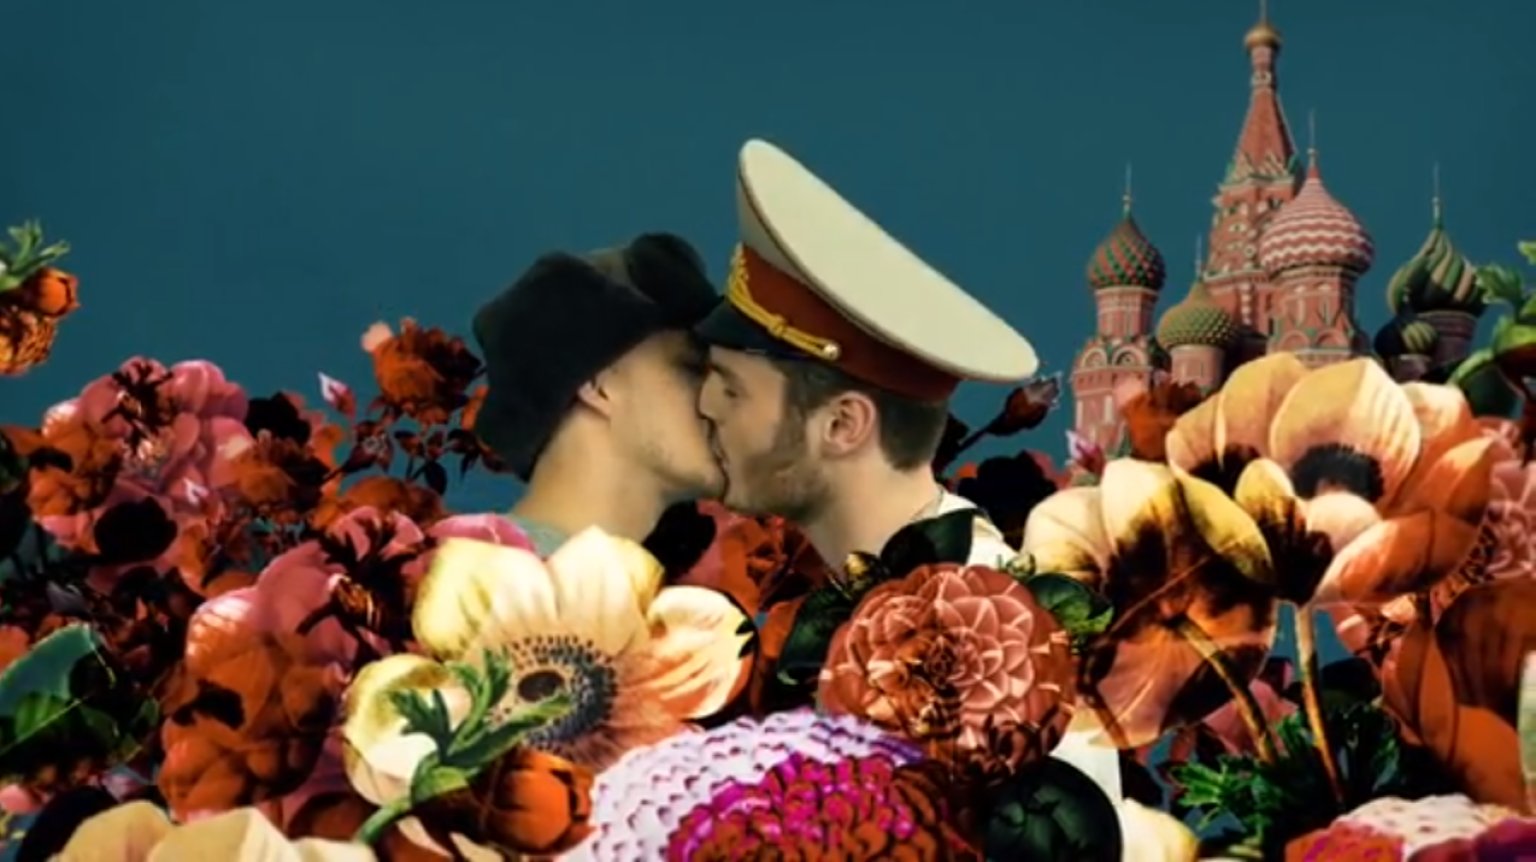 Autohearts Moscow Video Features Russian Soldiers Sharing Steamy Gay